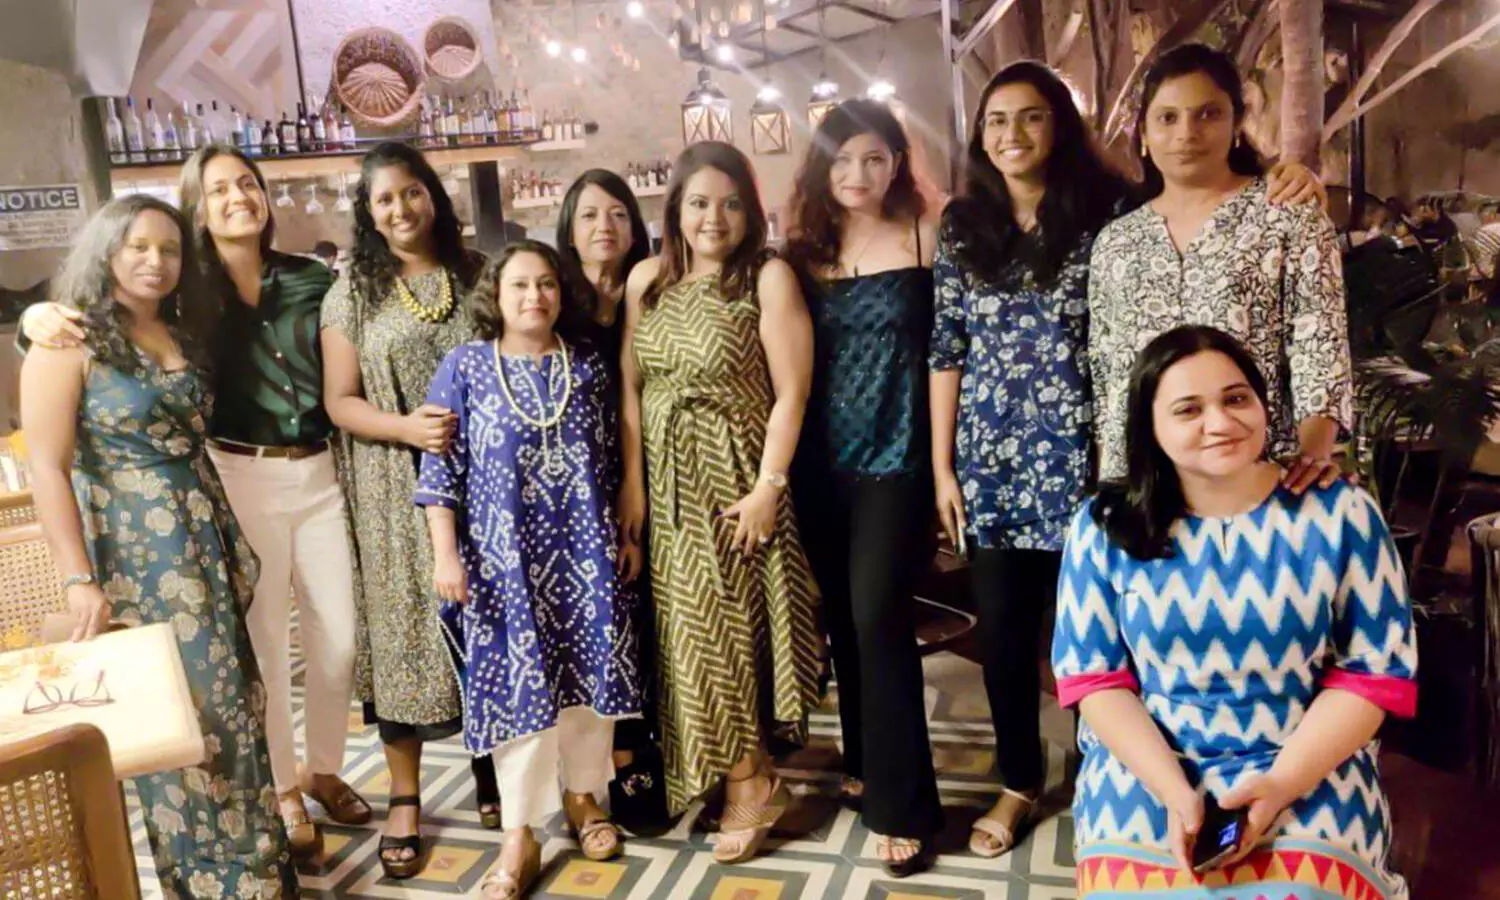 With ‘Status Single’, India’s first, only community for single women, you are never alone